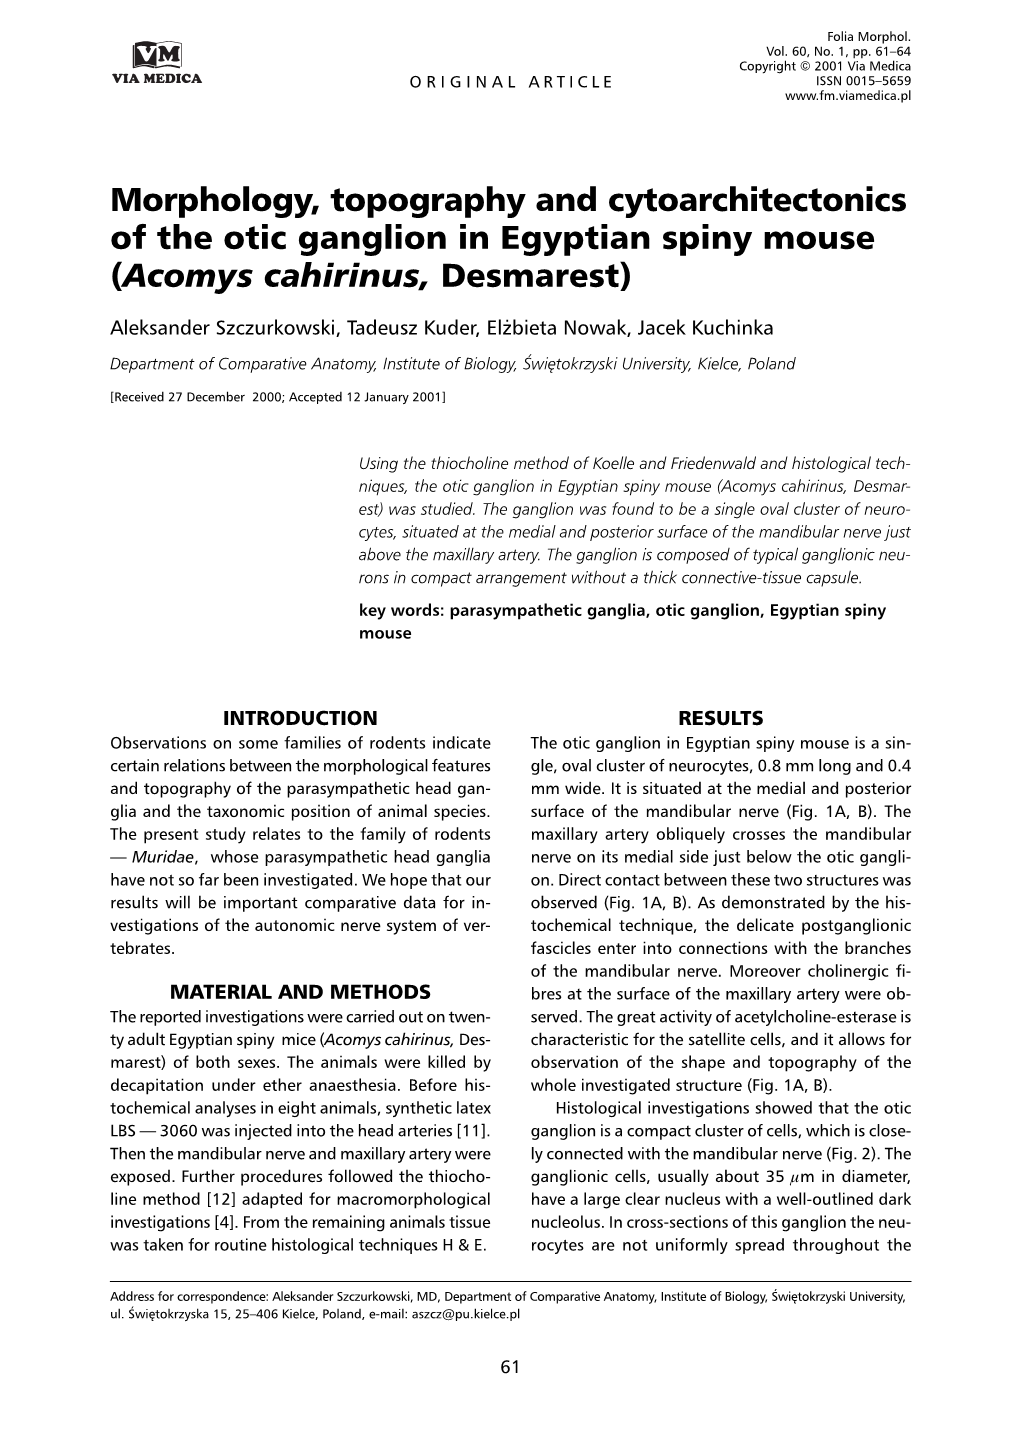 Morphology, Topography and Cytoarchitectonics of the Otic Ganglion in Egyptian Spiny Mouse (Acomys Cahirinus, Desmarest)